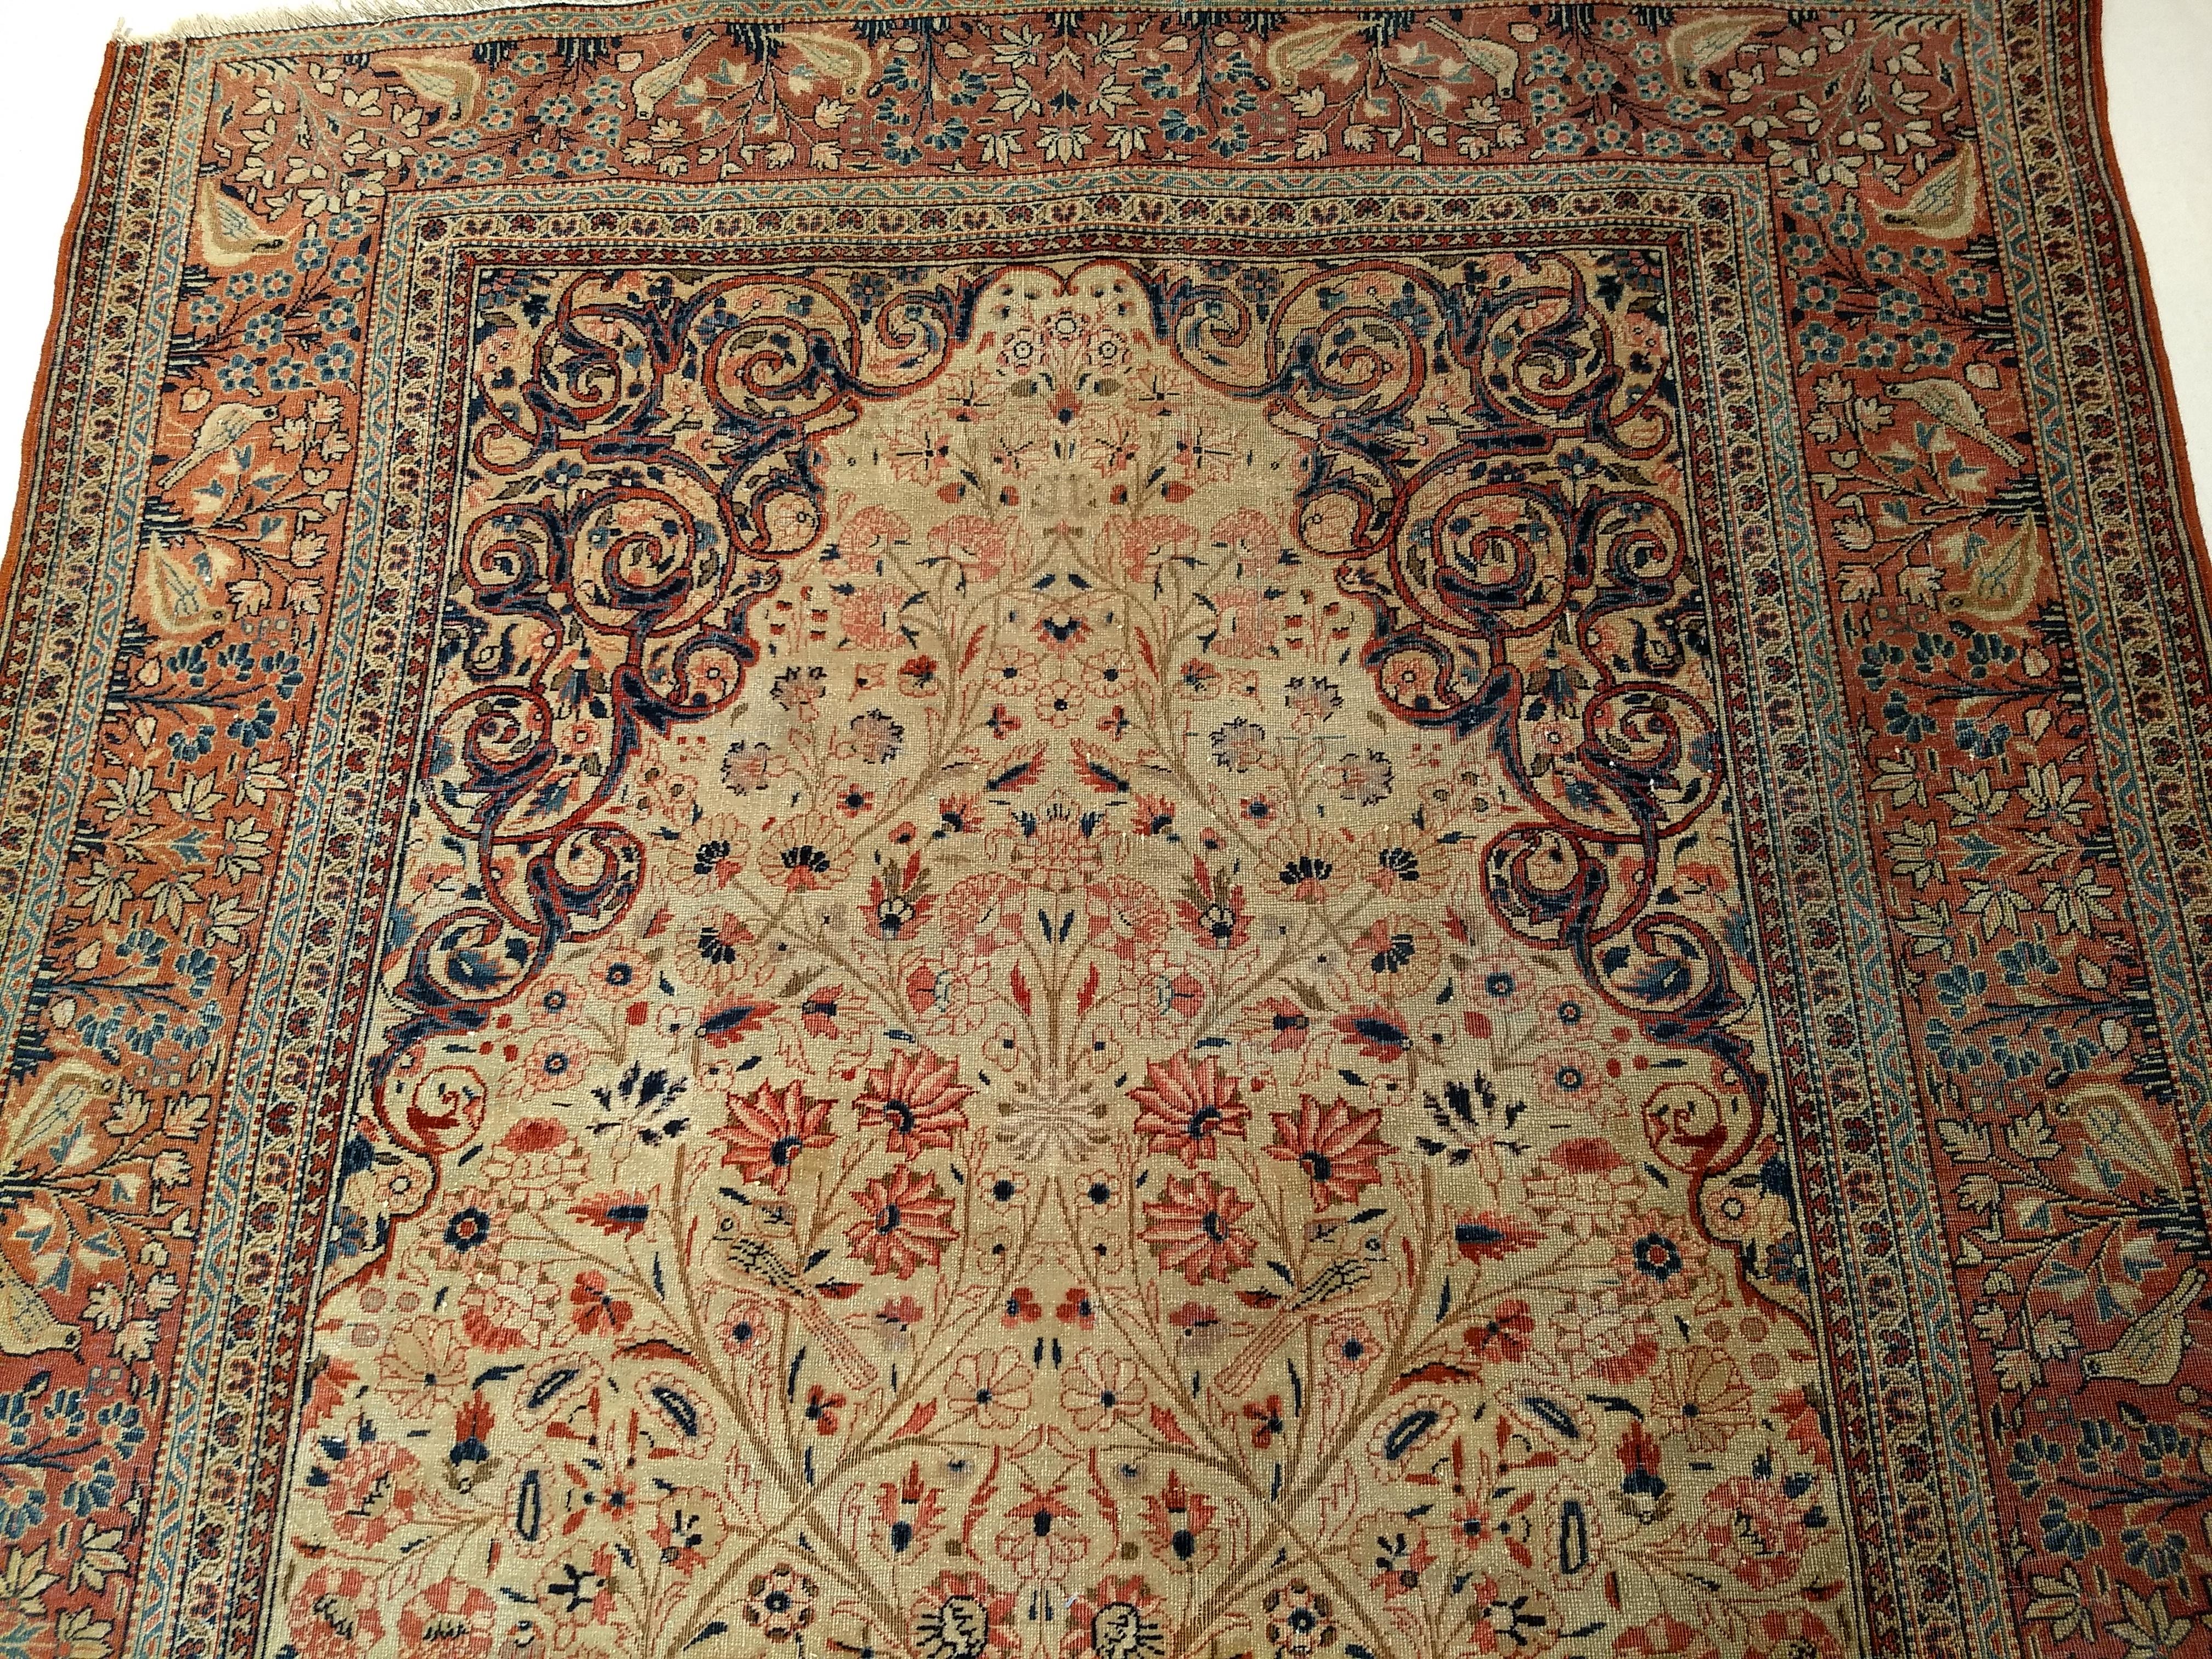 19th Century Persian Kashan Vase “Tree of Life” Rug in Ivory, Brick Red, Navy For Sale 2